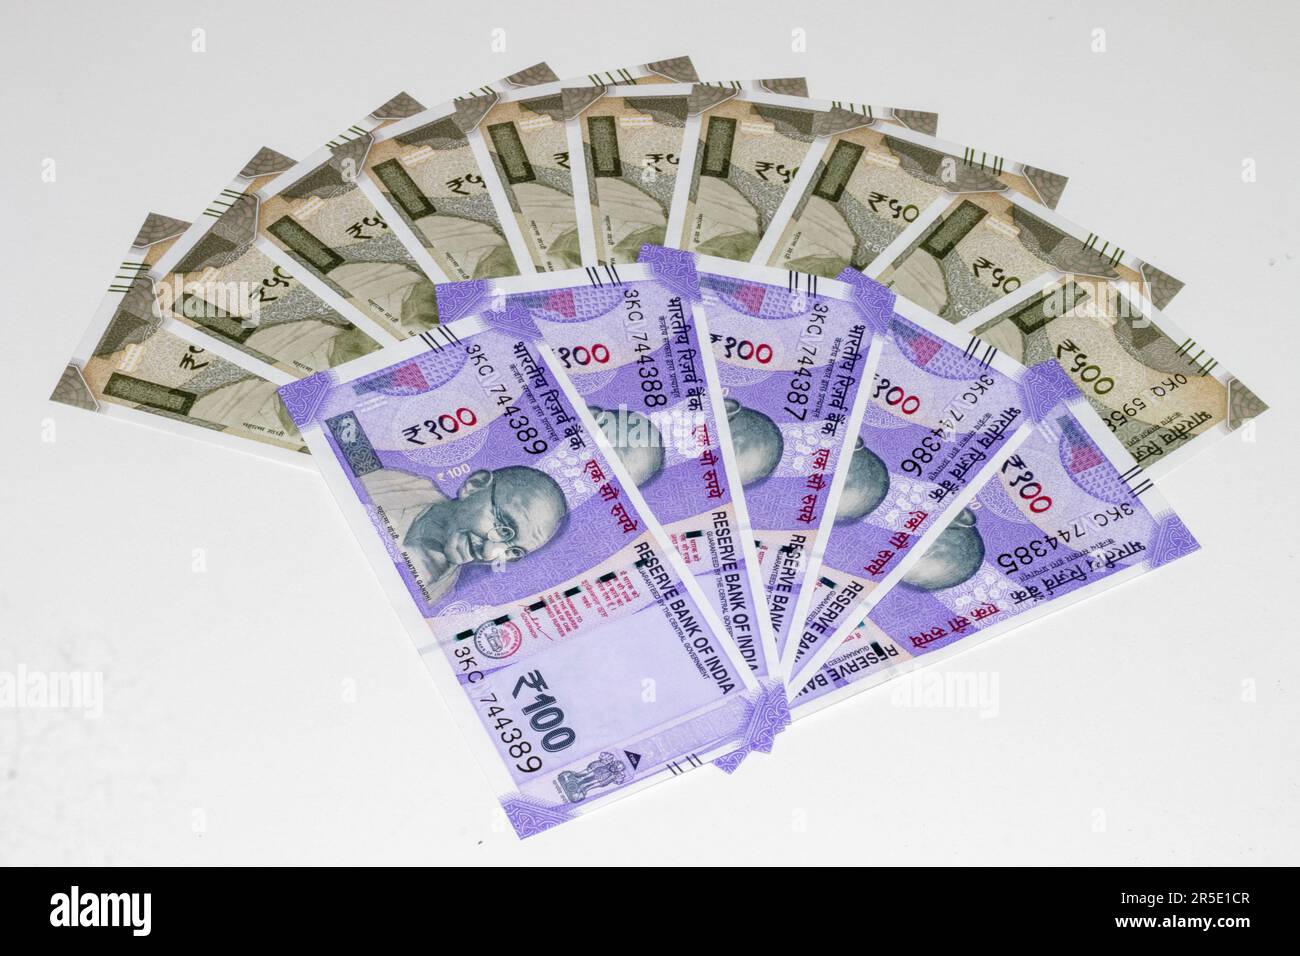 New Indian Currency 500 and 100 rupees Stock Photo